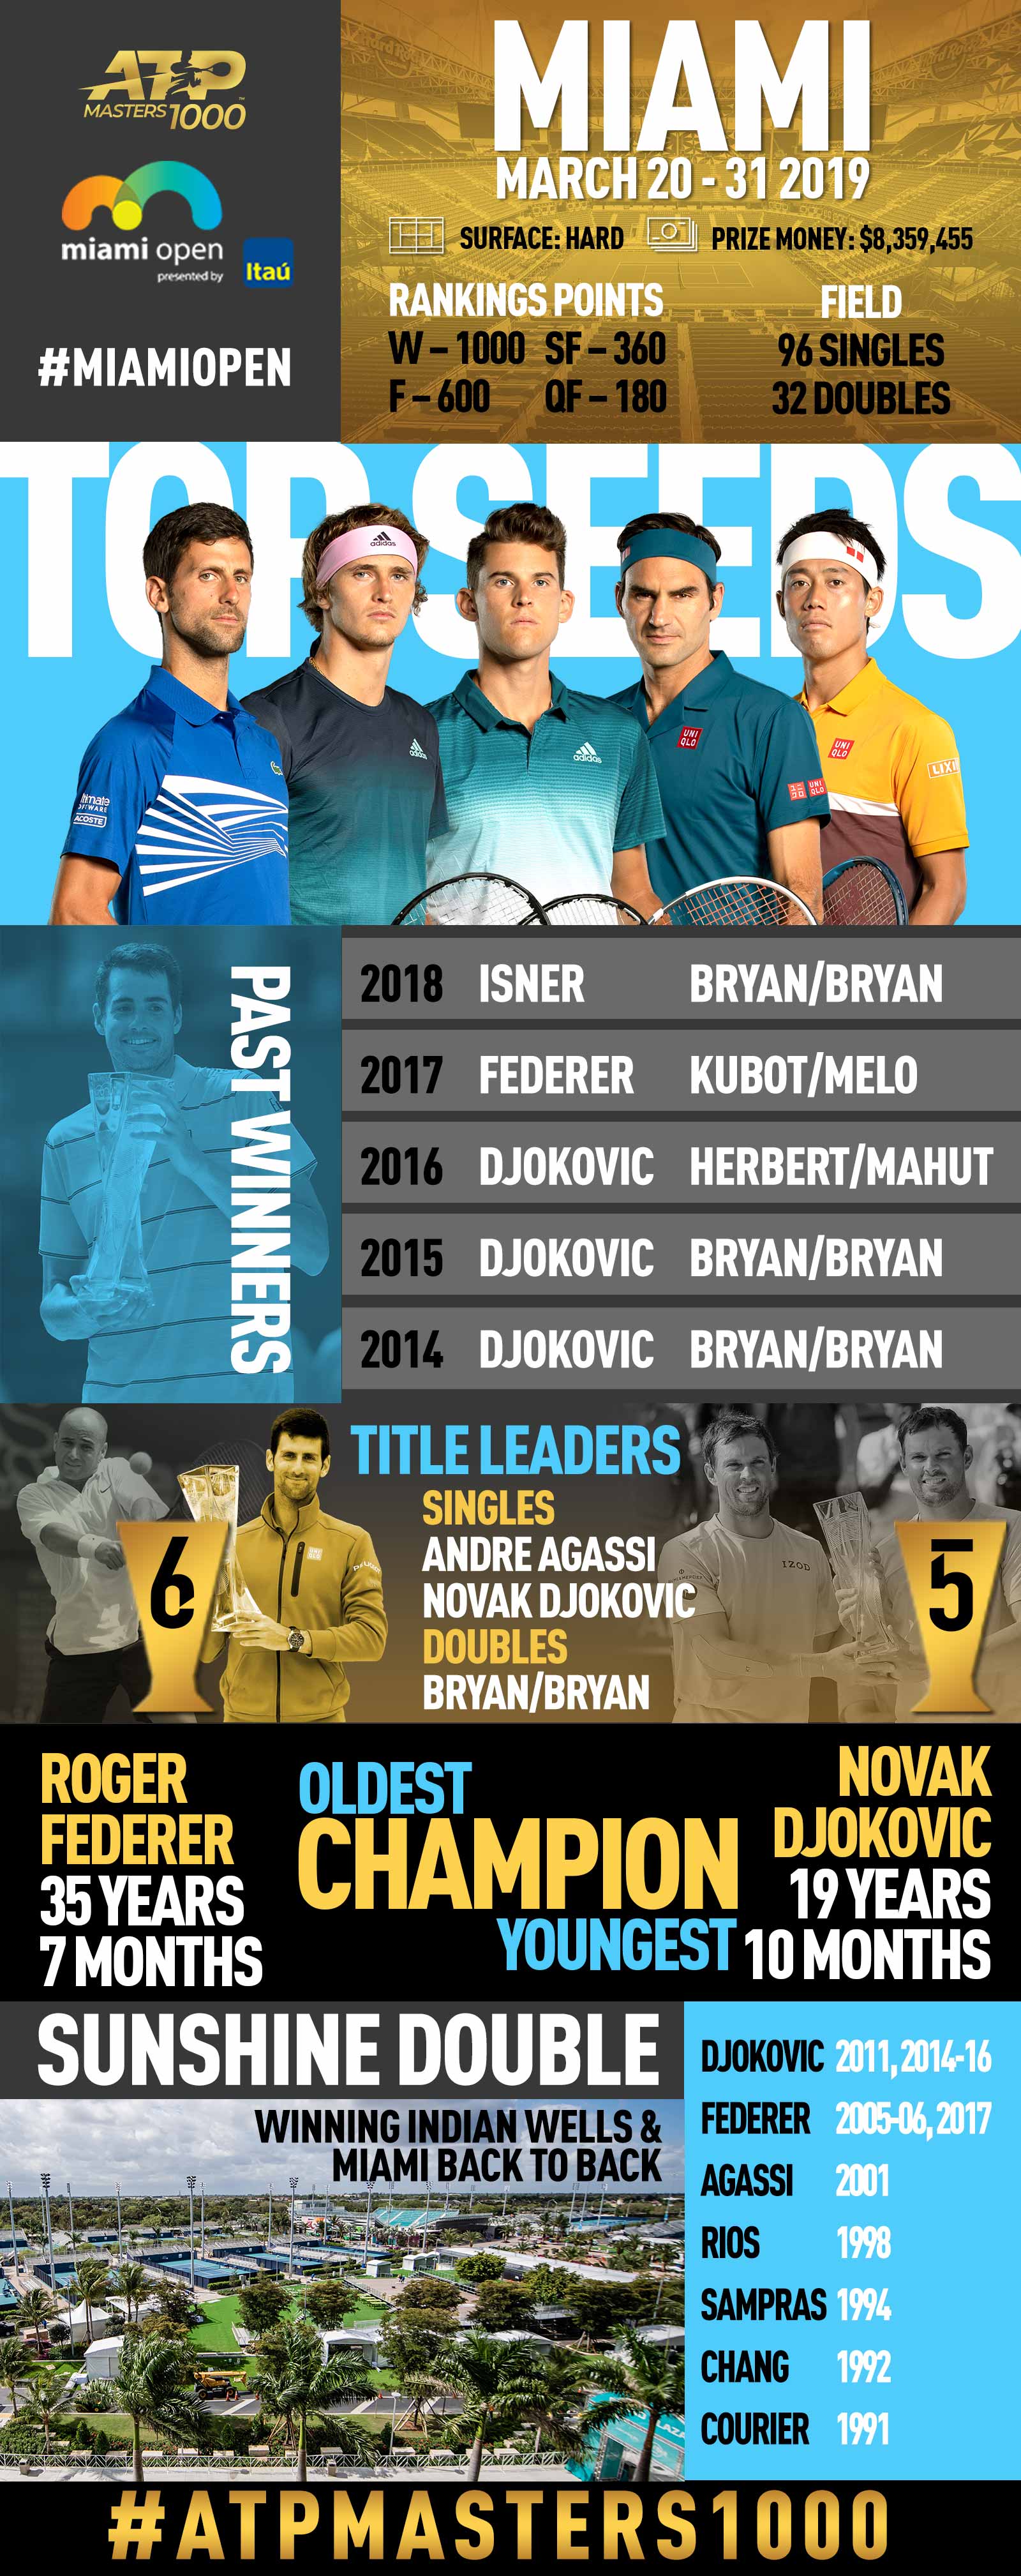 Facts & Figures from the 2019 <a href='https://www.atptour.com/en/tournaments/miami/403/overview'>Miami Open presented by Itau</a>, an ATP Masters 1000 tennis tournament